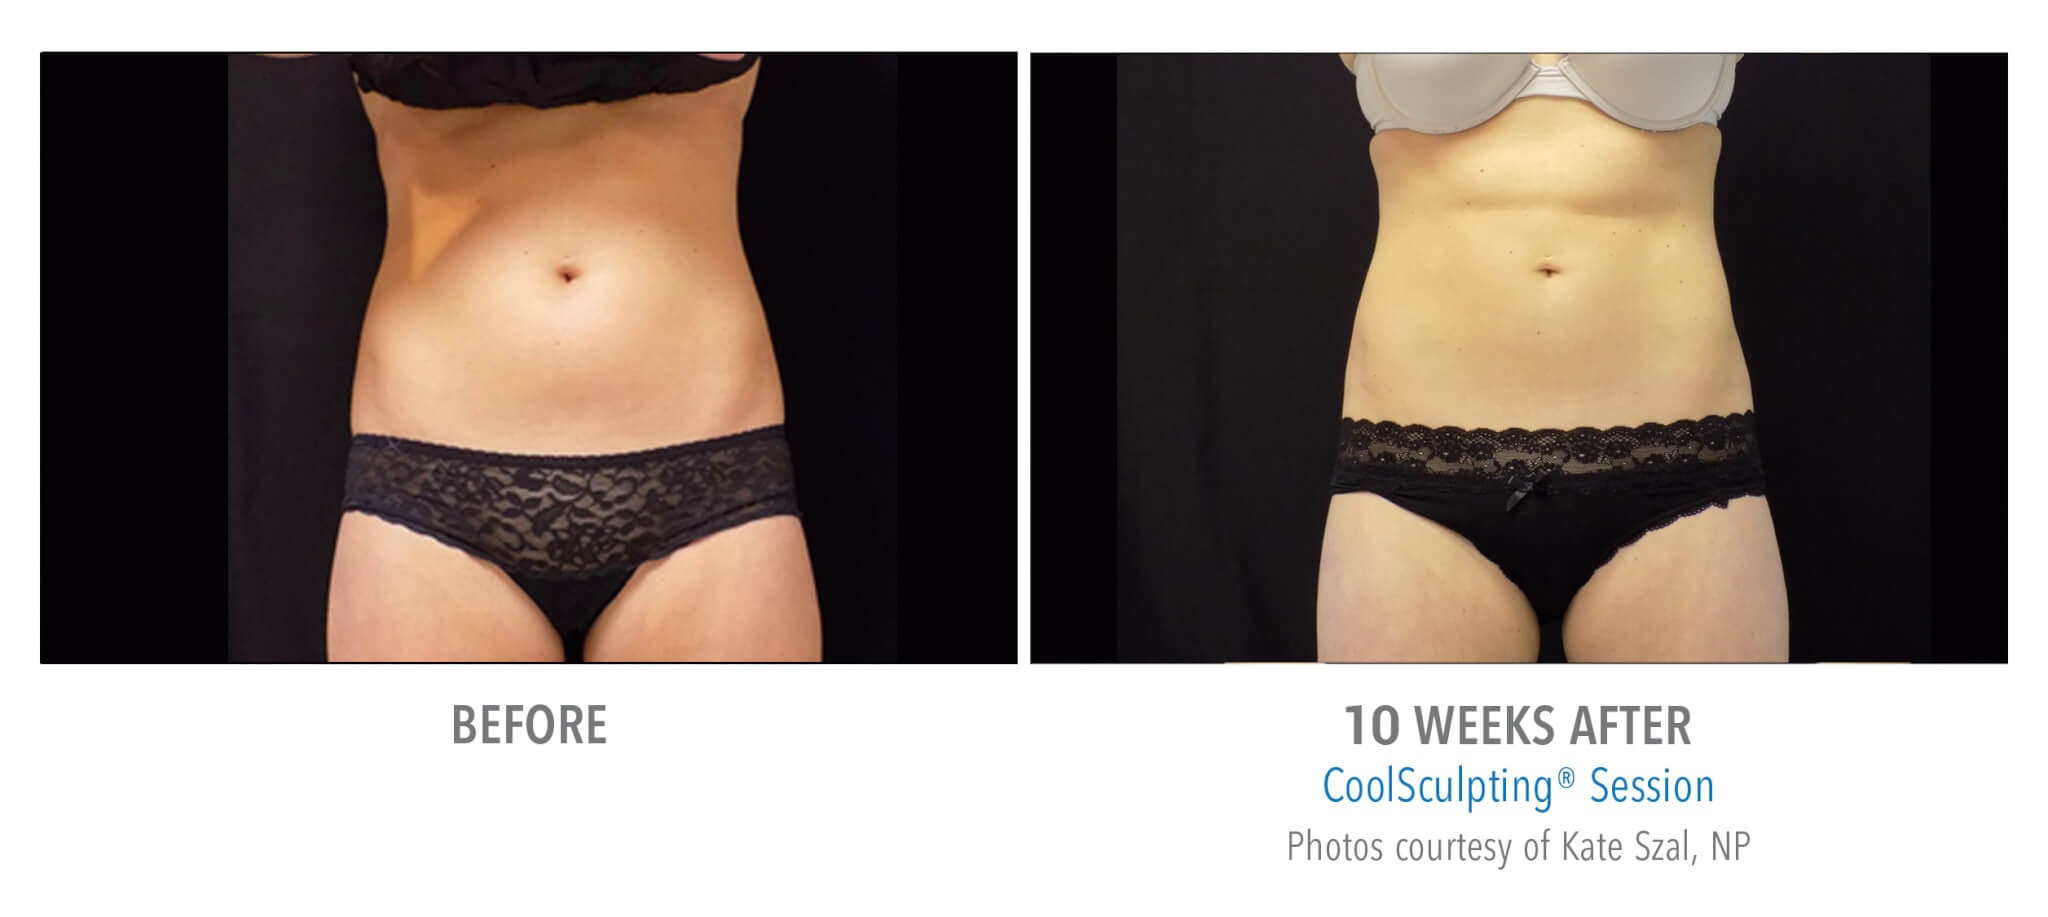 CS1 coolsculpting patient before and after